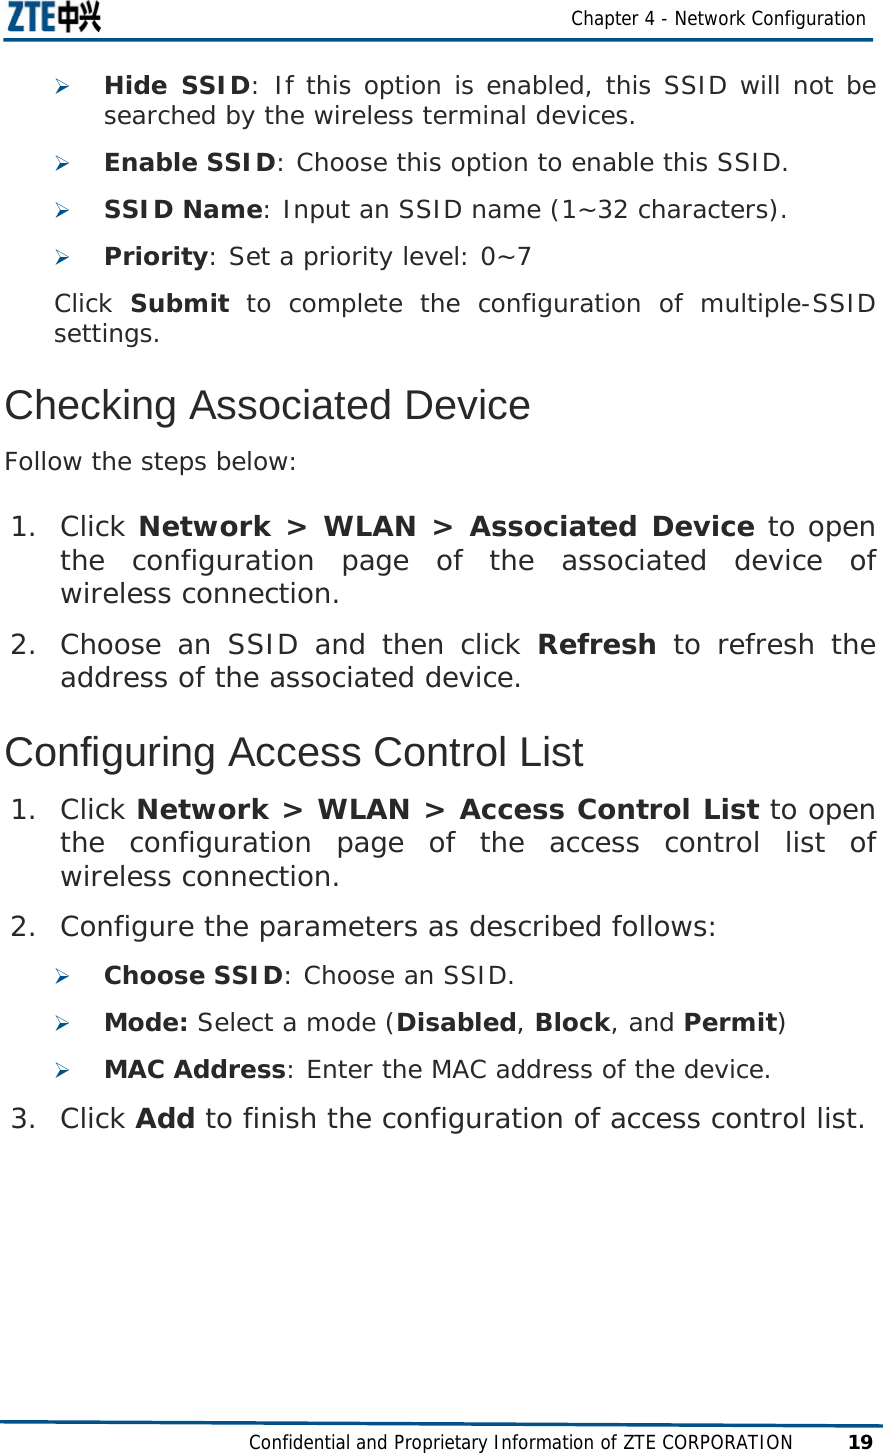  Chapter 4 - Network Configuration Confidential and Proprietary Information of ZTE CORPORATION 19 ¾ Hide SSID: If this option is enabled, this SSID will not be searched by the wireless terminal devices. ¾ Enable SSID: Choose this option to enable this SSID. ¾ SSID Name: Input an SSID name (1~32 characters). ¾ Priority: Set a priority level: 0~7 Click  Submit to complete the configuration of multiple-SSID settings. Checking Associated Device Follow the steps below: 1. Click Network &gt; WLAN &gt; Associated Device to open the configuration page of the associated device of wireless connection. 2. Choose an SSID and then click Refresh to refresh the address of the associated device. Configuring Access Control List 1. Click Network &gt; WLAN &gt; Access Control List to open the configuration page of the access control list of wireless connection. 2. Configure the parameters as described follows: ¾ Choose SSID: Choose an SSID. ¾ Mode: Select a mode (Disabled, Block, and Permit) ¾ MAC Address: Enter the MAC address of the device. 3. Click Add to finish the configuration of access control list.  